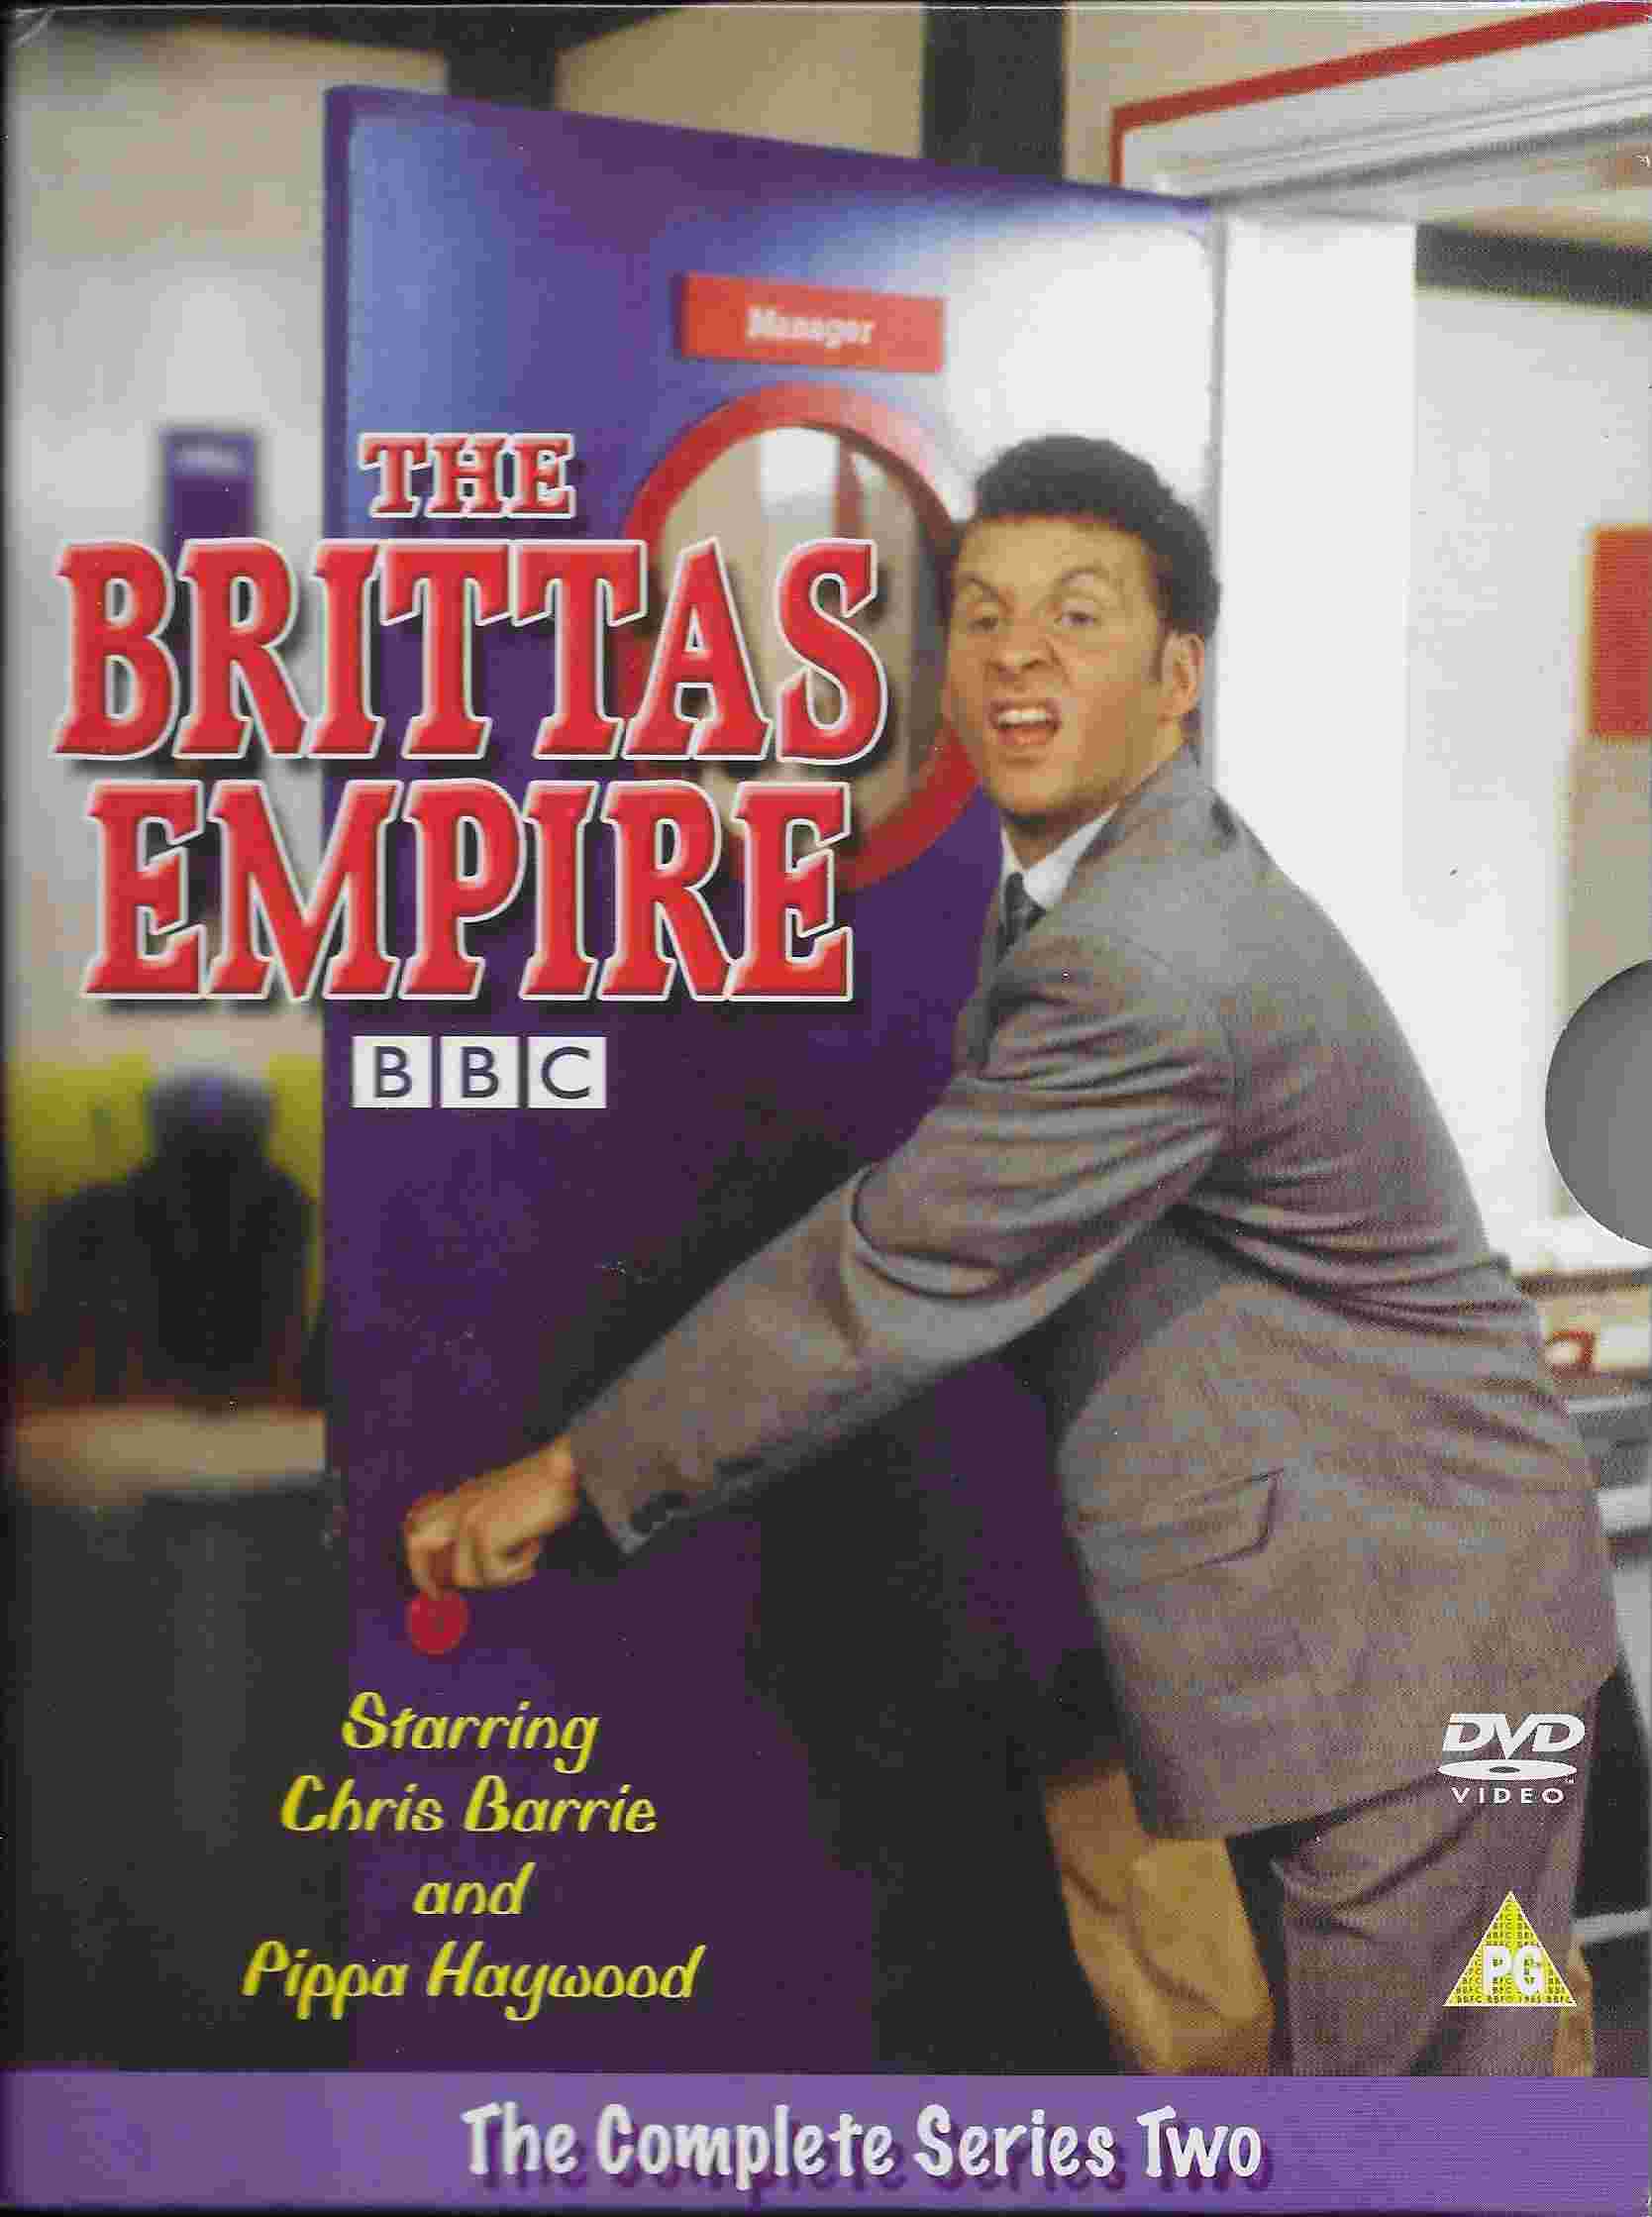 Picture of EKA 50012 The Brittas empire - Series 2 DVD by artist Richard Fegen / Andrew Norriss from the BBC records and Tapes library